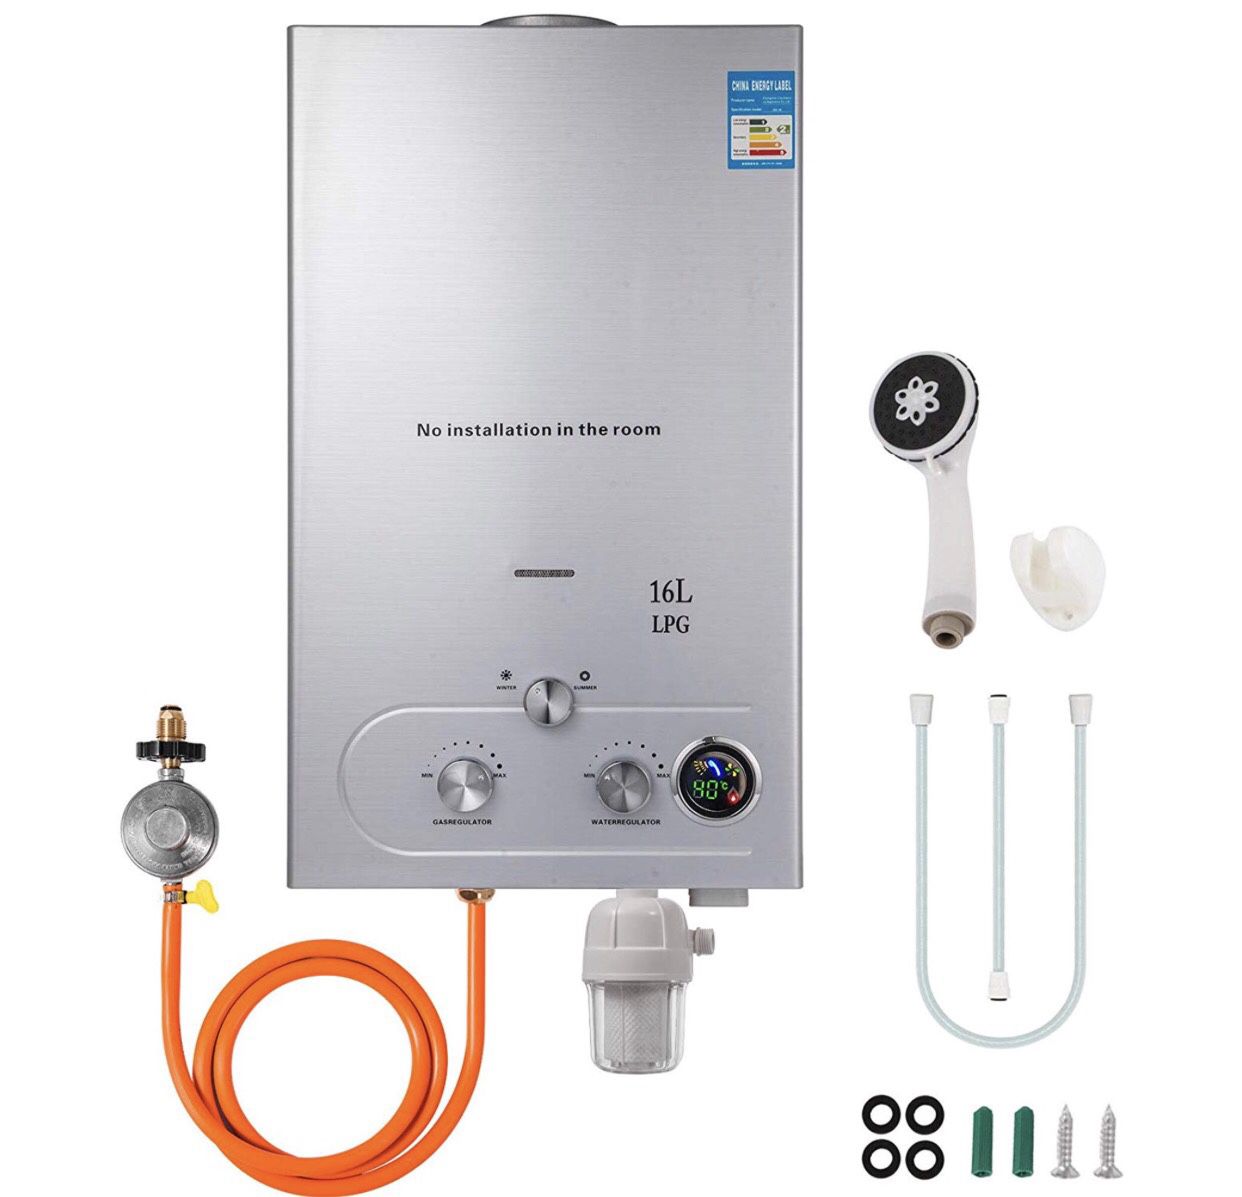 VEVOR 16L Tankless Hot Water Heater Propane Gas 4.3GPM Water Filter LED Display